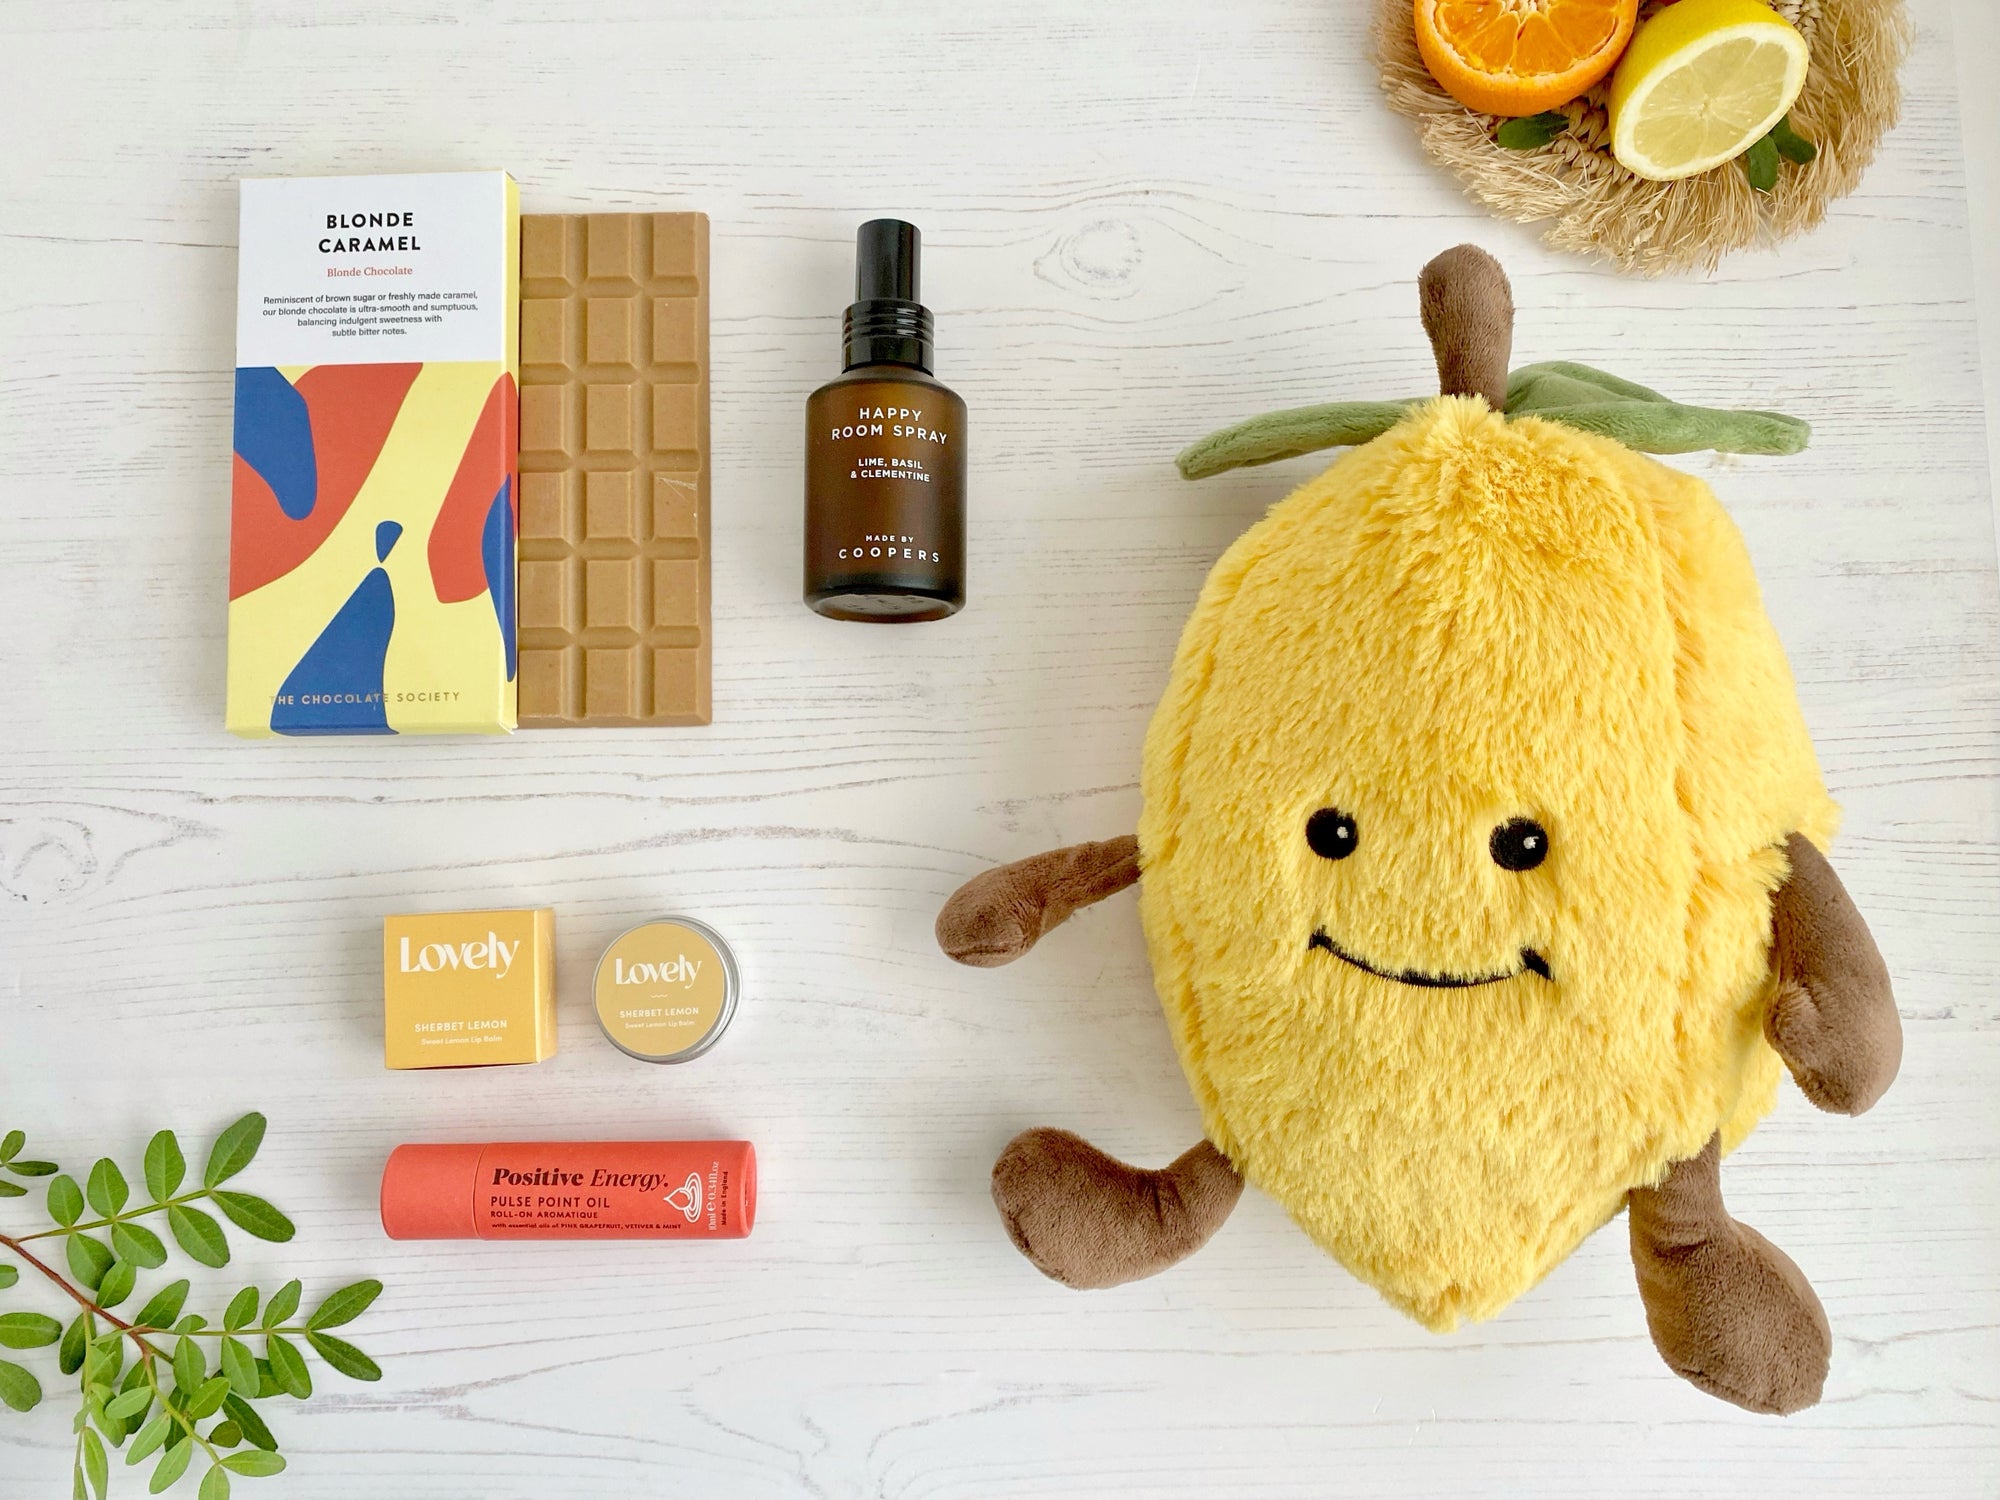 Mood Boost Care Package with lemon soft cuddly toy, happy room mist spray, blonde chocolate bar, sherbert lemon lip balm, positive energy roll on oil